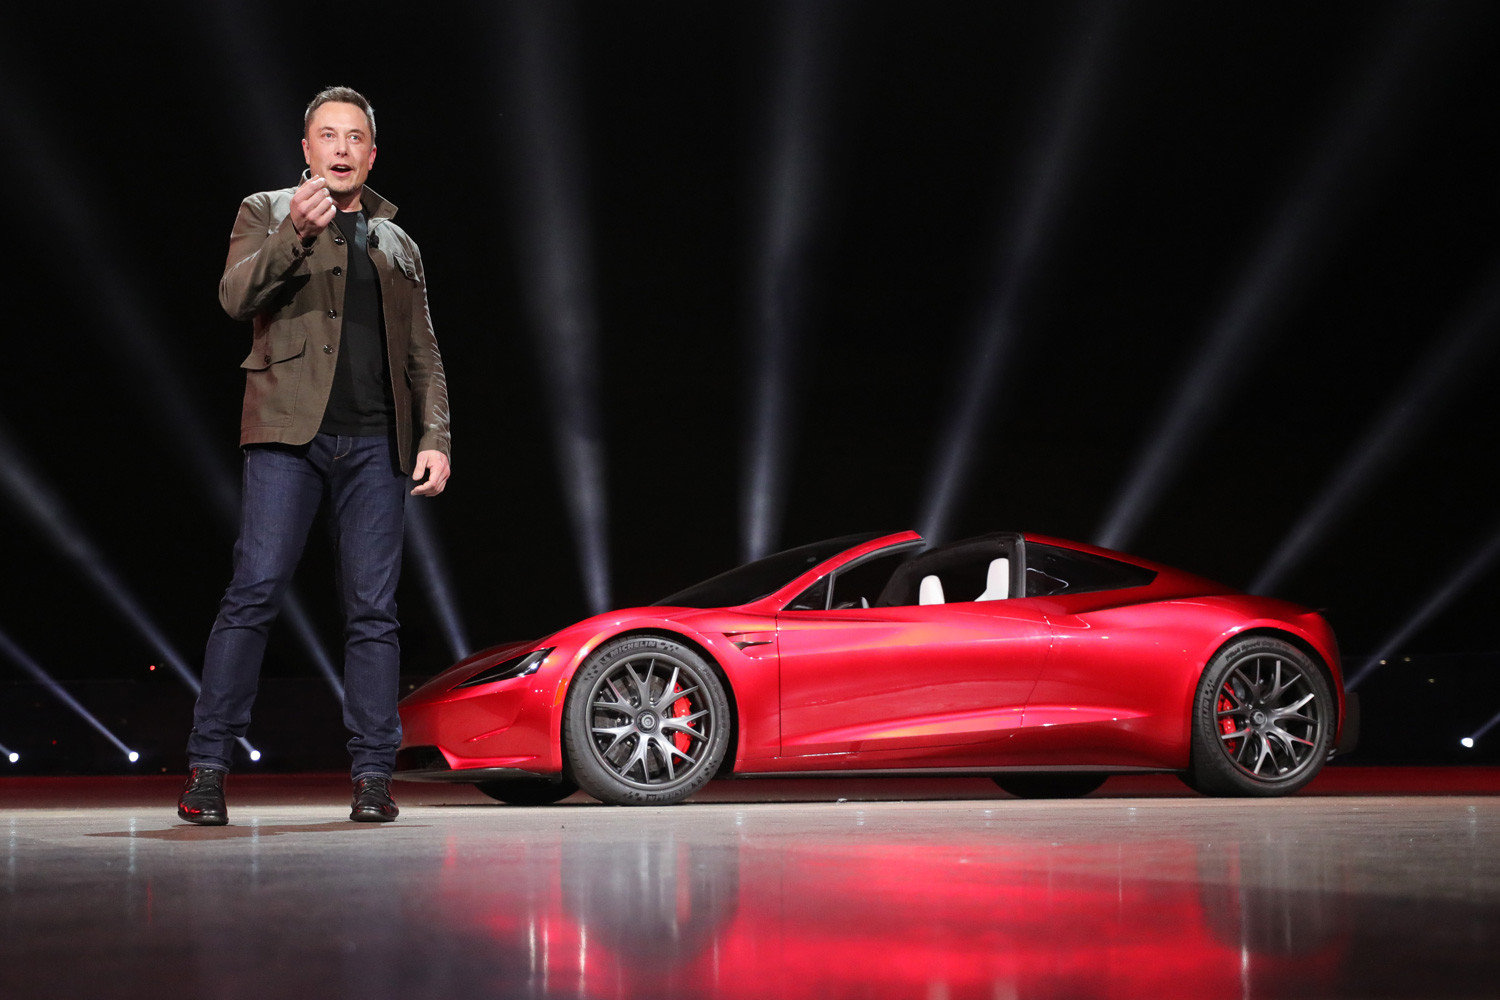 Musk presenting Tesla Motors 2020 Roadster on November 16, 2017. Tesla Inc. seems to be an extremely successful company with great capitalization - but on the other hand, experts doubt if it ever can become profitable.